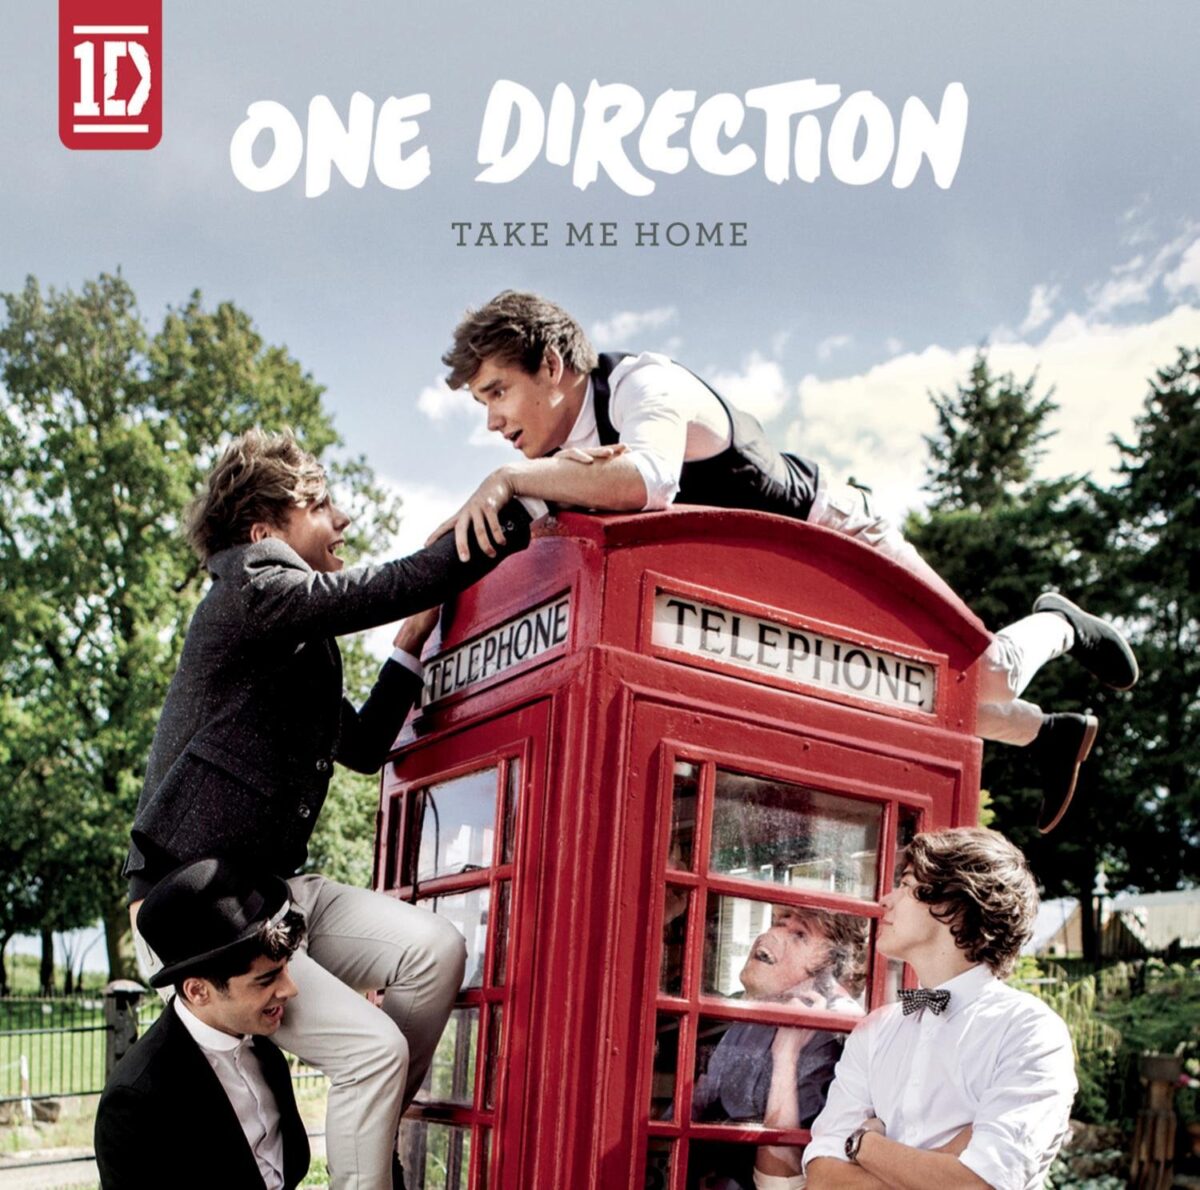 Album cover for "Take Me Home" by One Direction. Pictures the band members in and around a red telephone box.